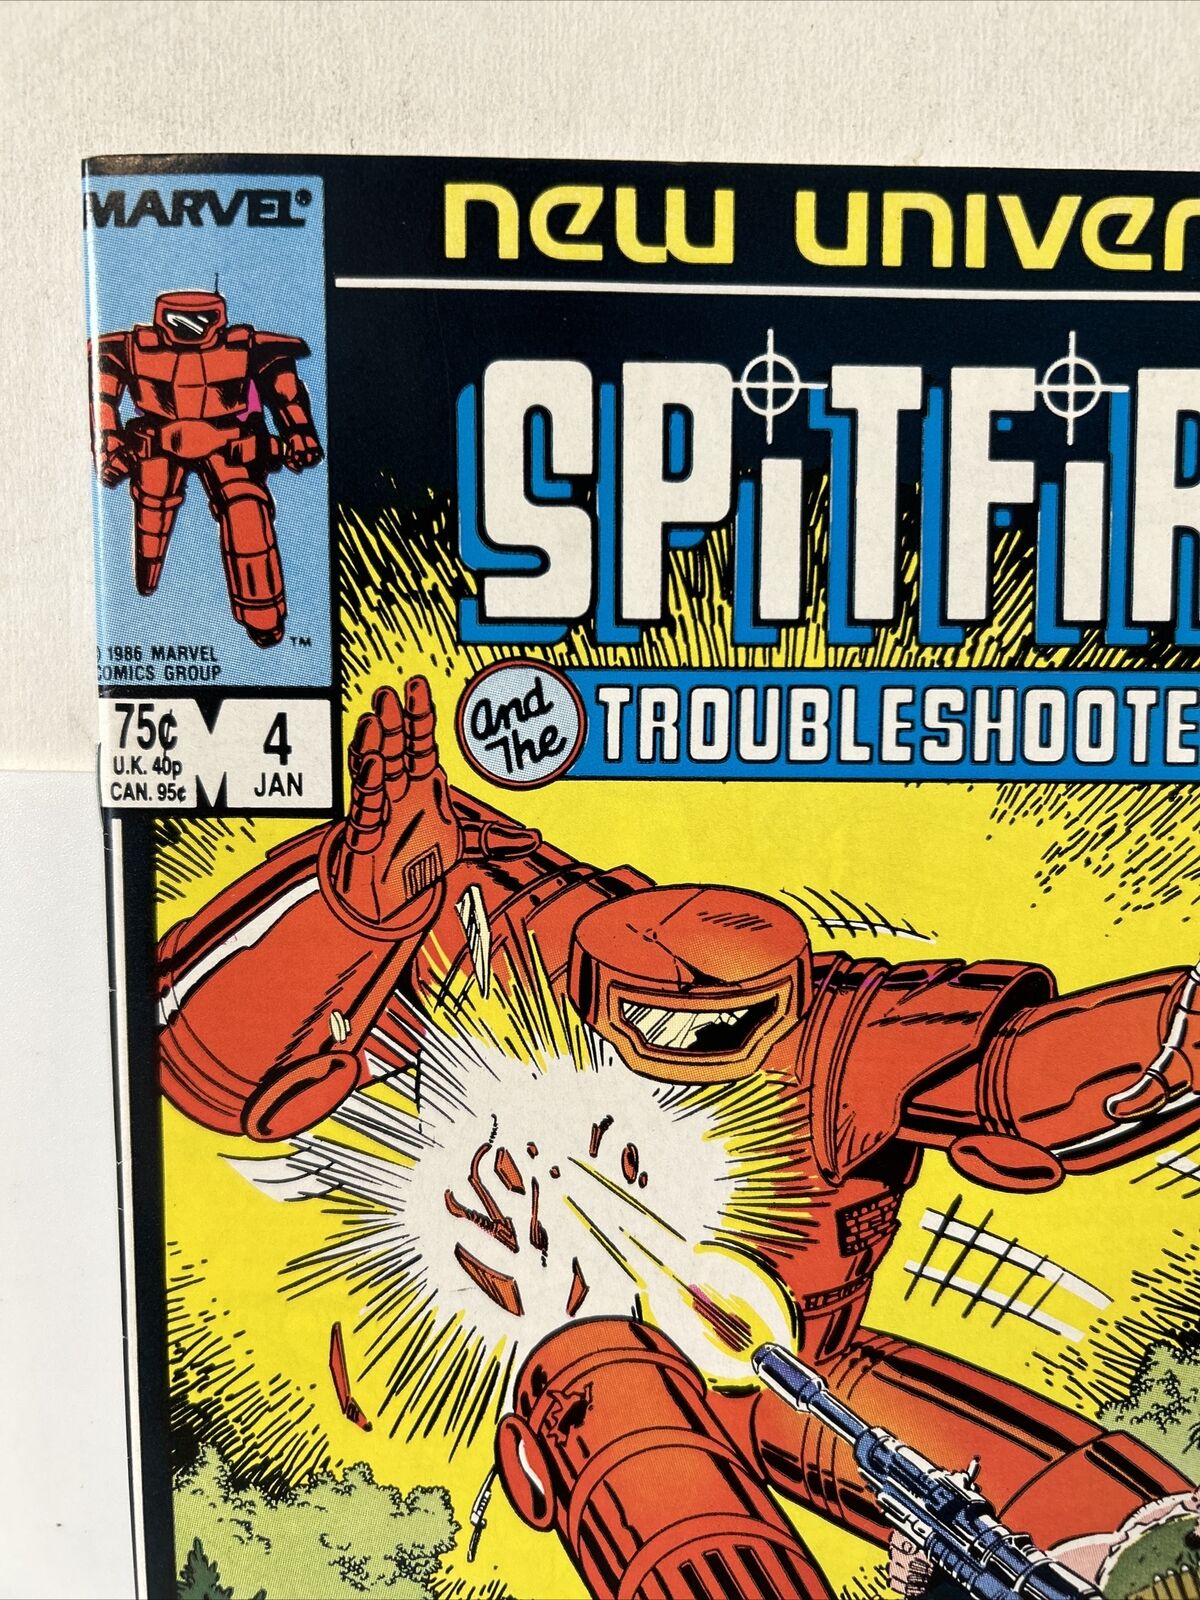 Spitfire And The Troubleshooters #4 (Marvel 1986) First McFarlane Marvel Work